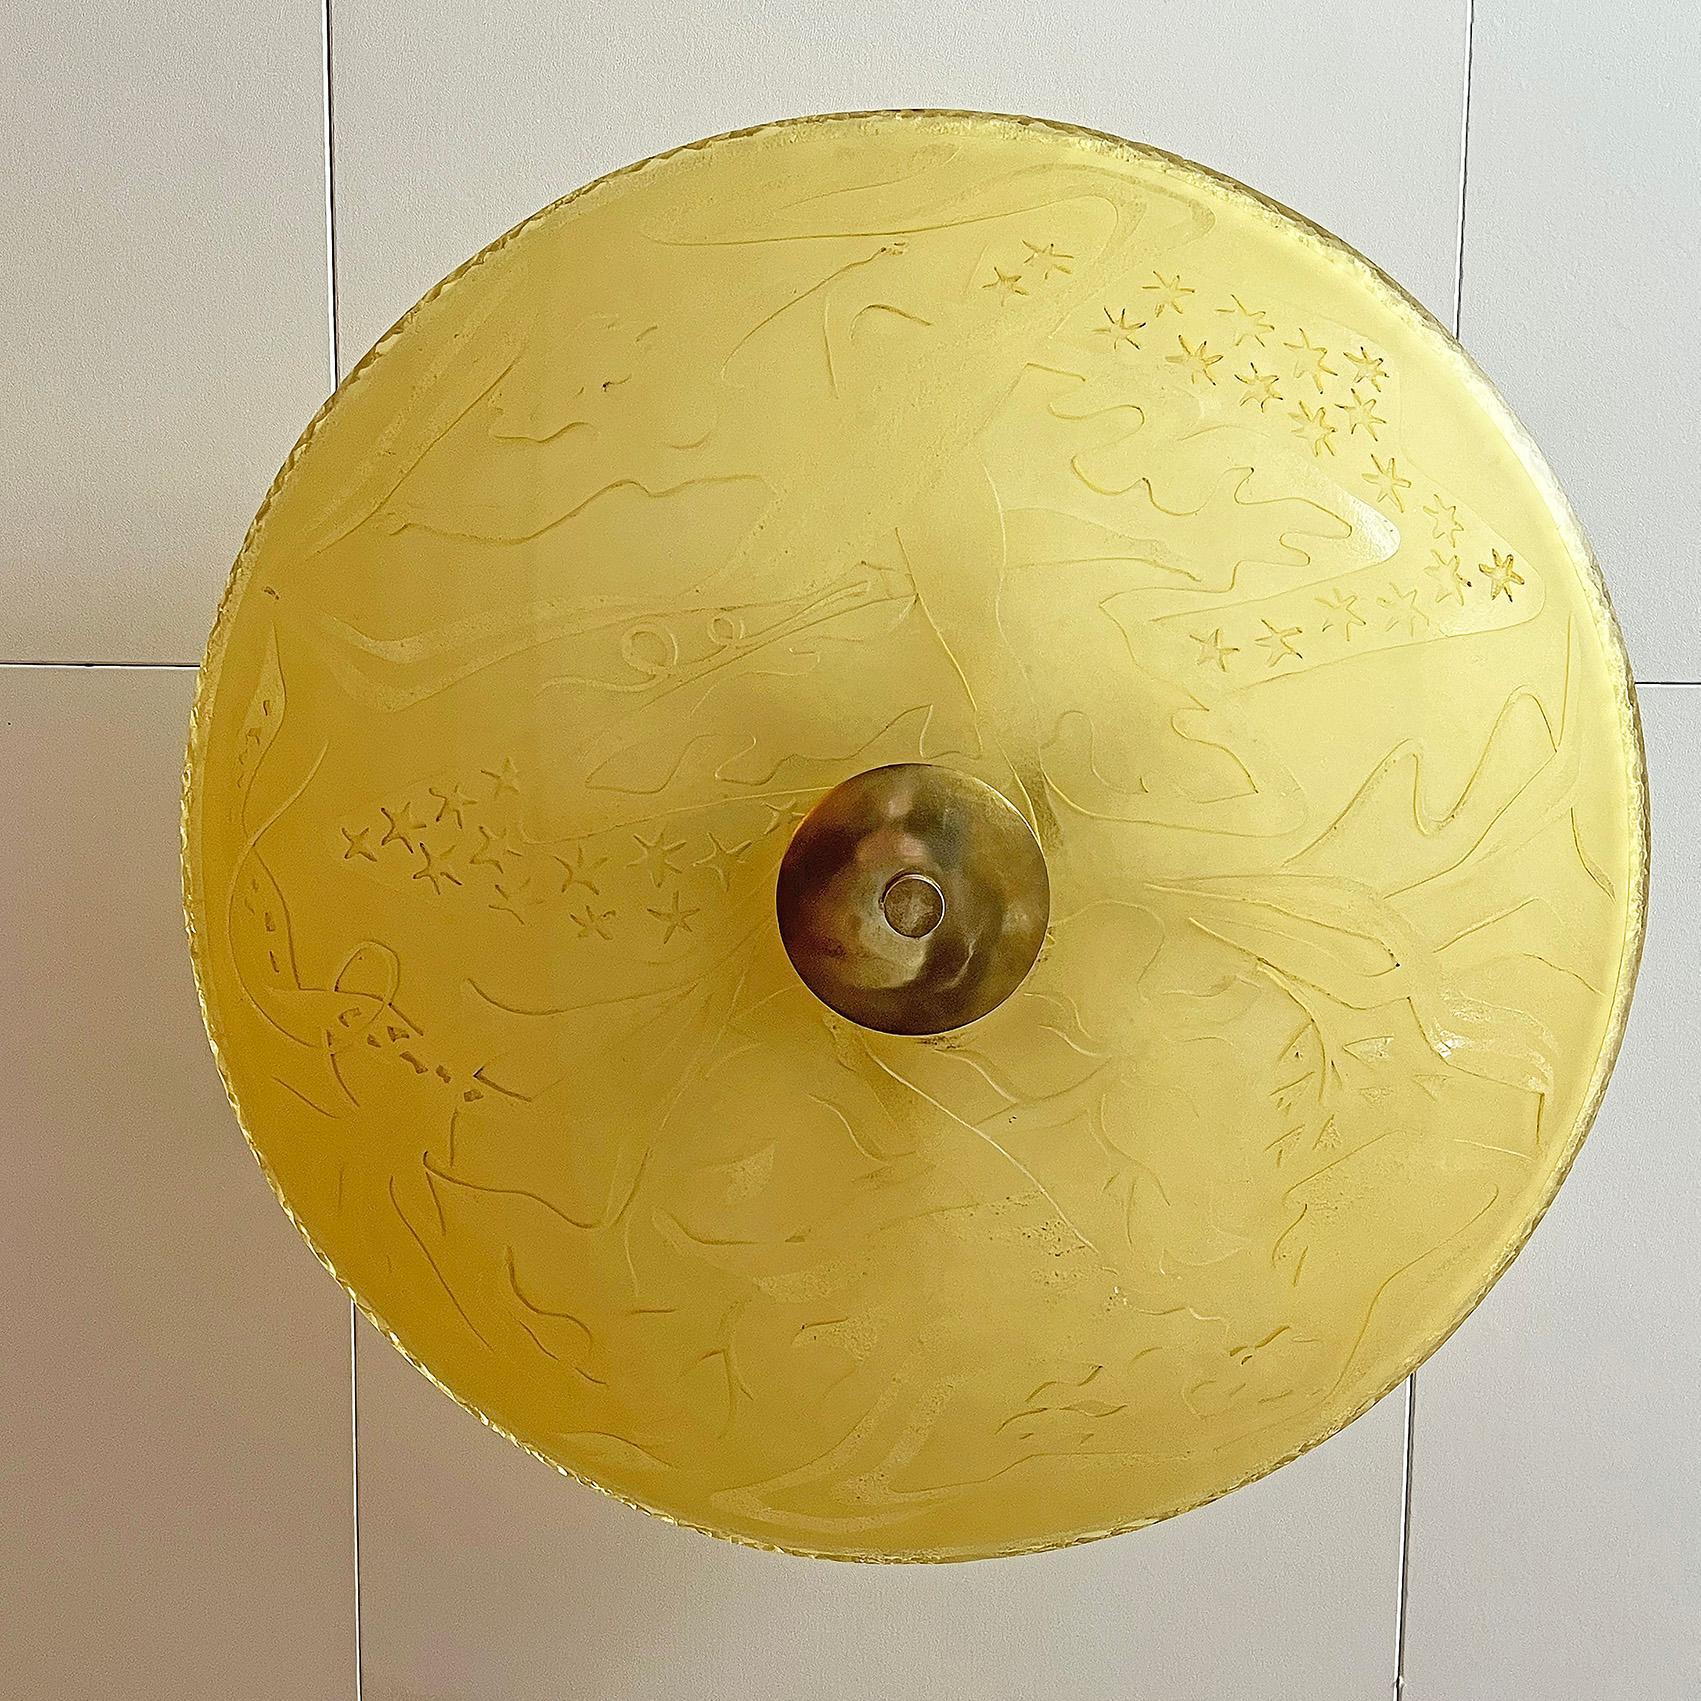 Scandinavian Modern Etched Glass Ceiling Light, Most Likely Glössner ca 1940's In Good Condition For Sale In Örebro, SE